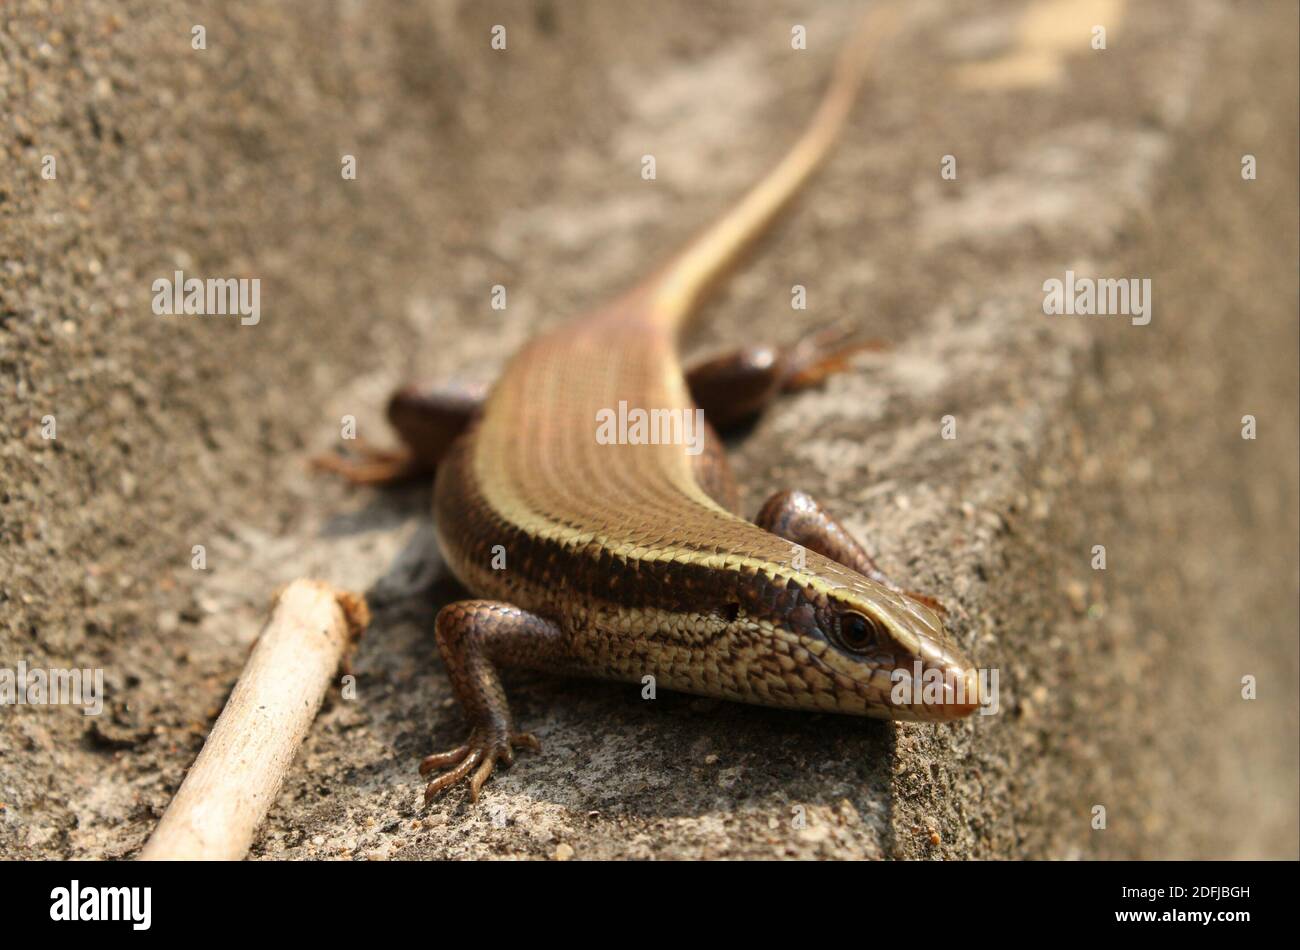 Common Dotted Garden Skink sitting on the wall. Stock Photo